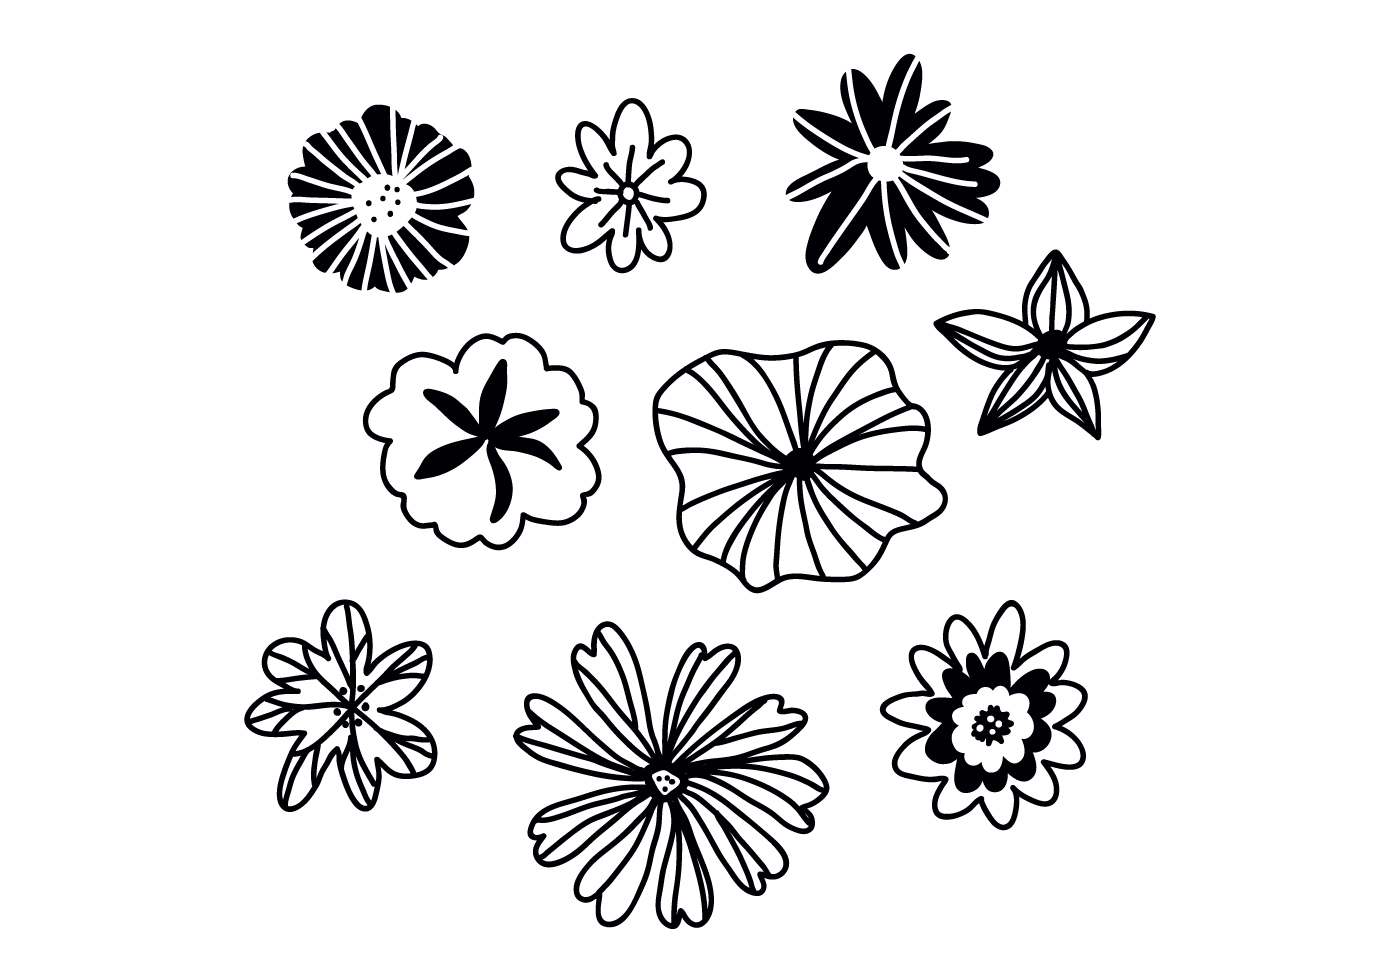 Download Set Of Black And White Flowers - Download Free Vectors ...